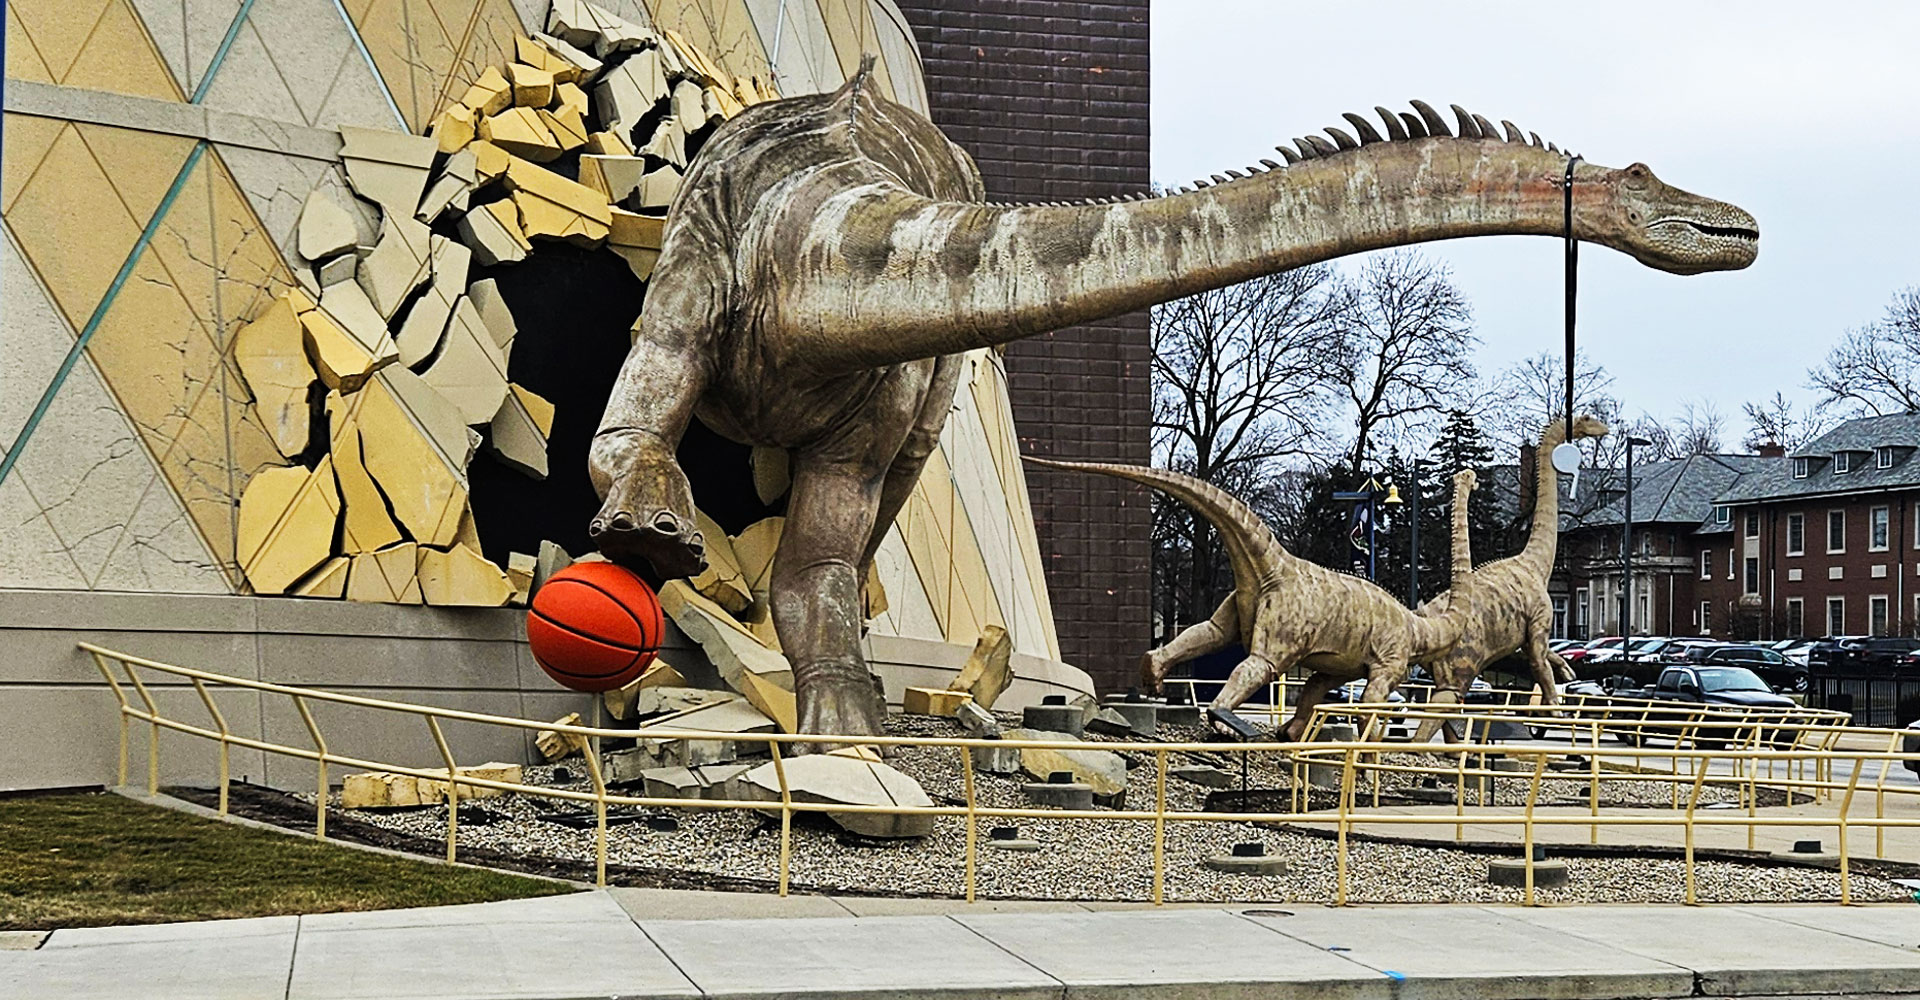 Sculpture of dinosaur bouncing a basketball and wearing a whistle.